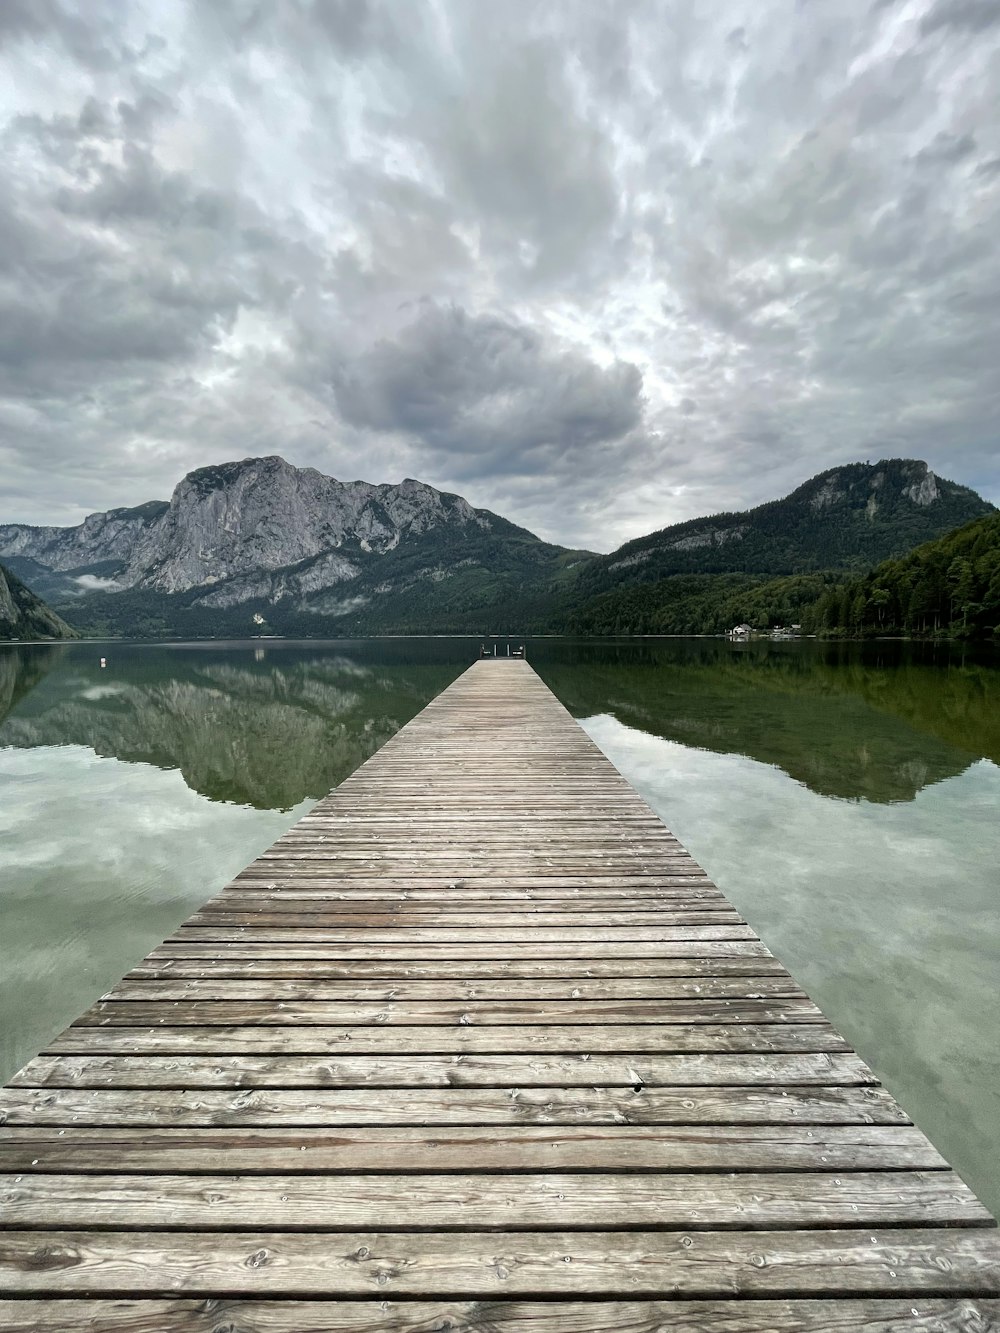 brown wooden dock on lake near mountain under cloudy sky during daytime